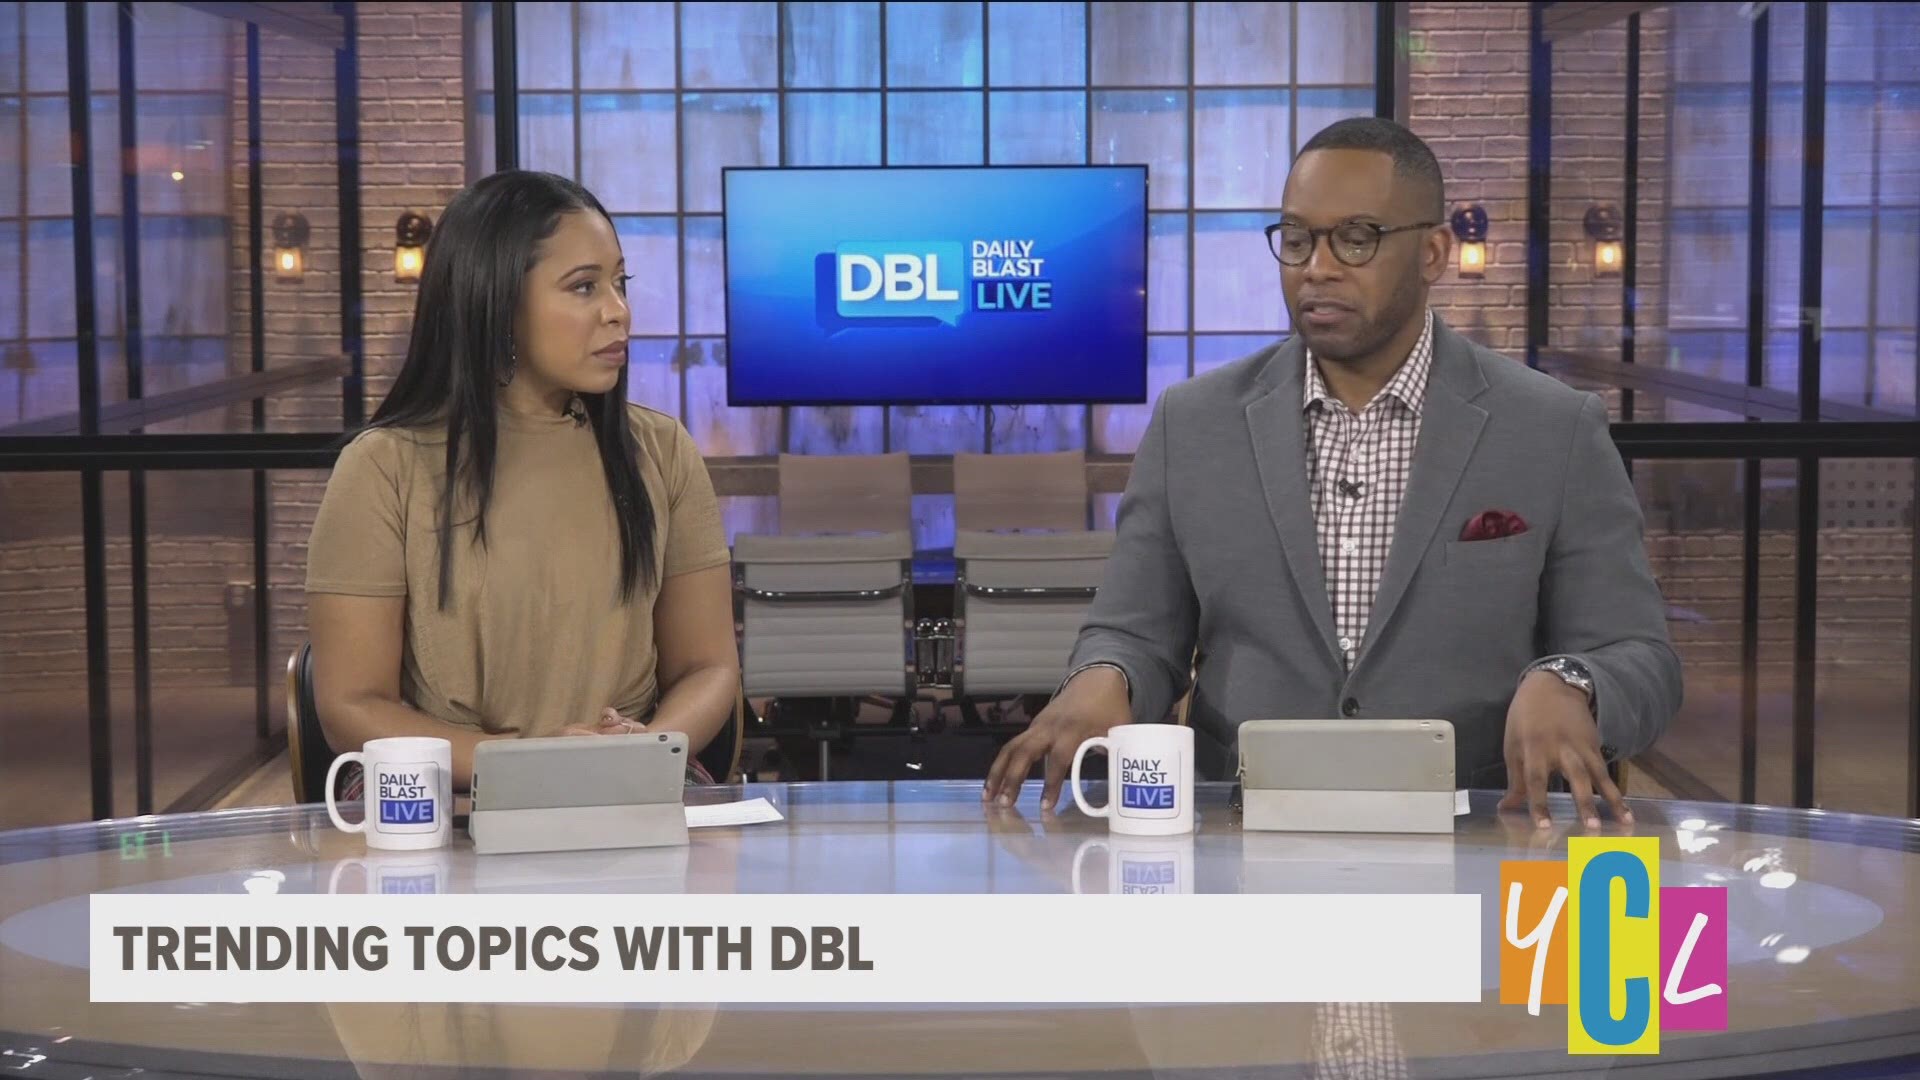 Aubrey Aquino chats with the hosts from Daily Blast Live about the latest trending topics.